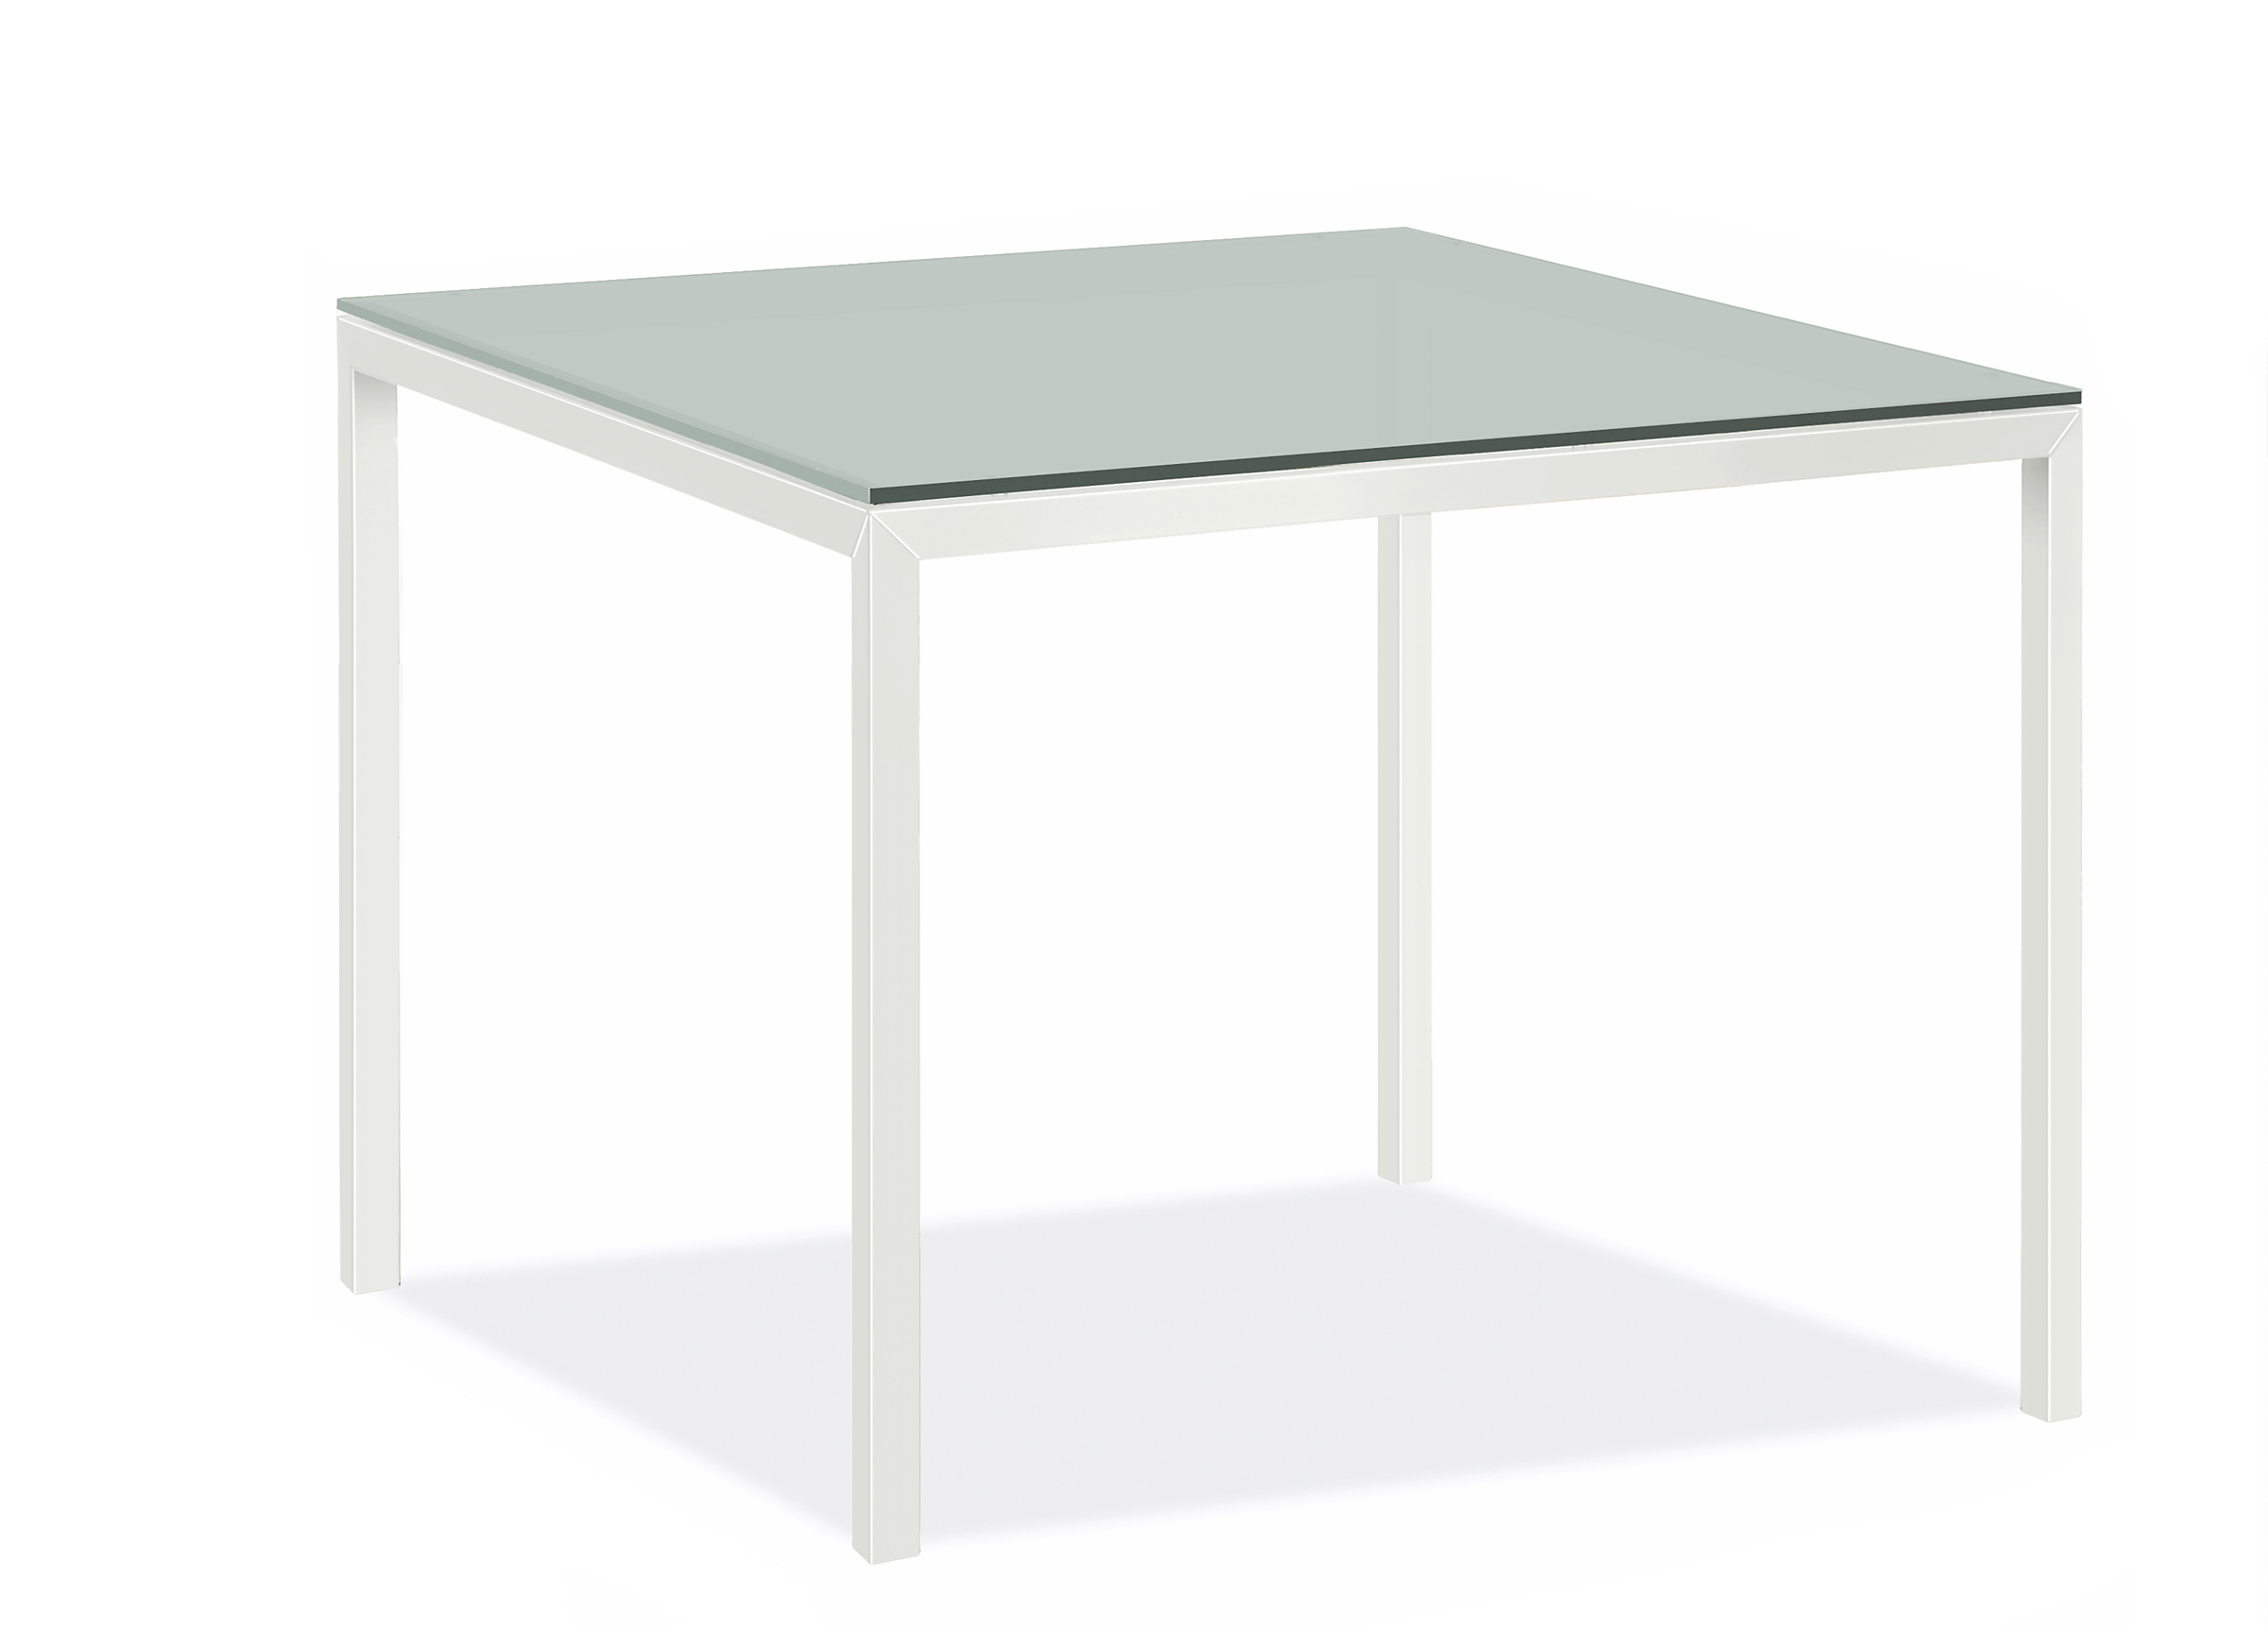 Parsons 36w 36d Outdoor Table with 1.5" Leg